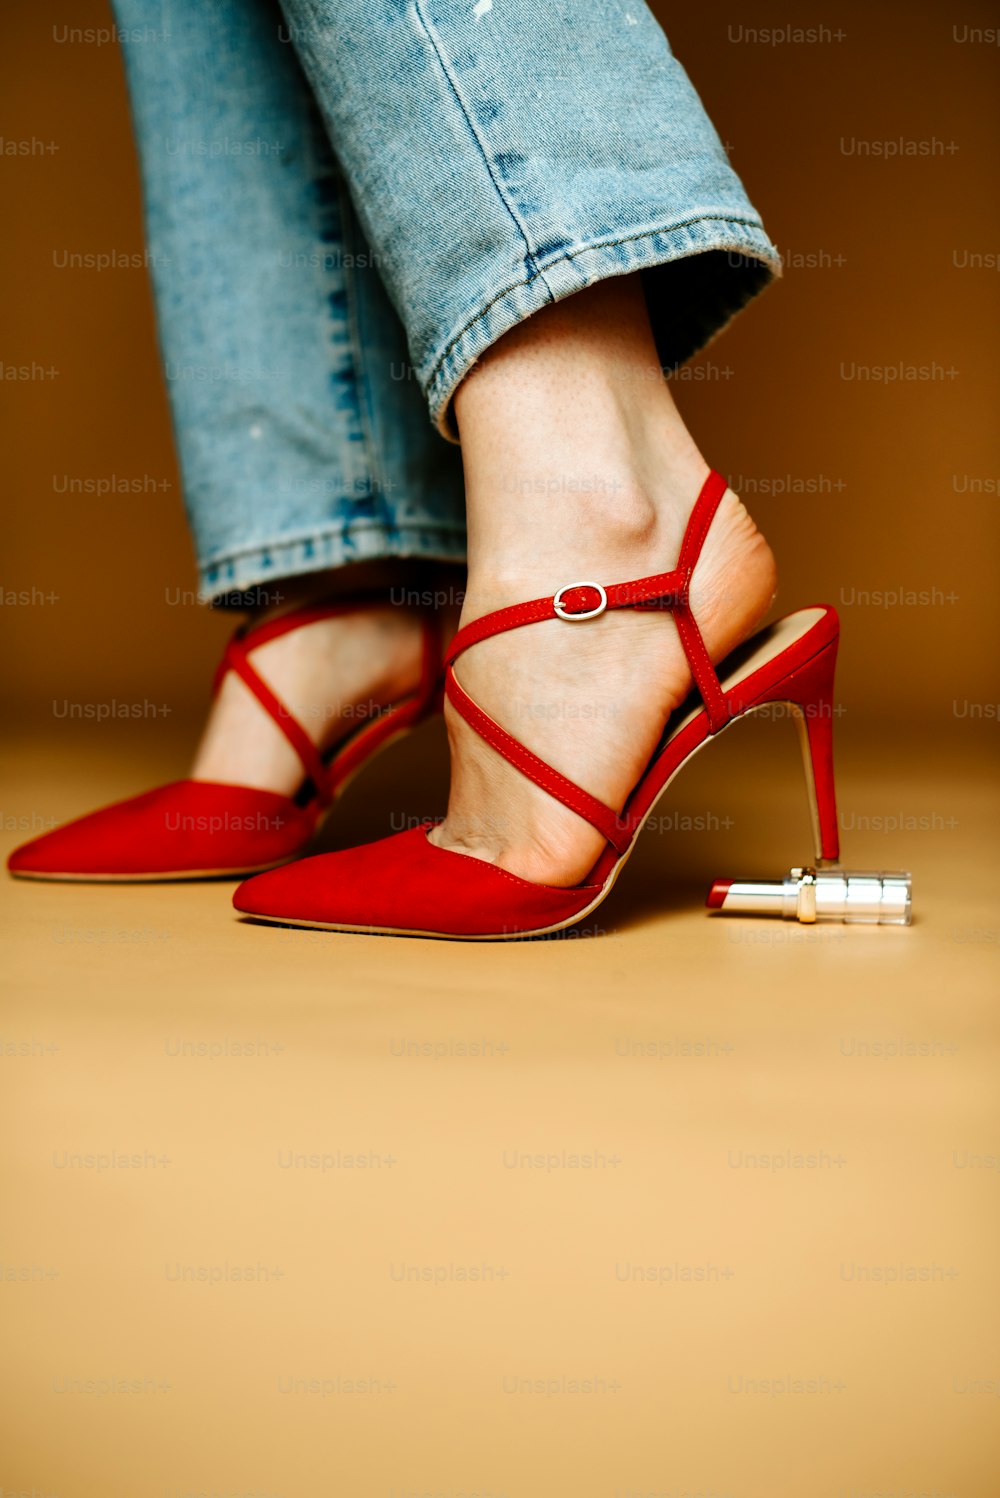 a woman wearing red high heels standing on a wooden floor